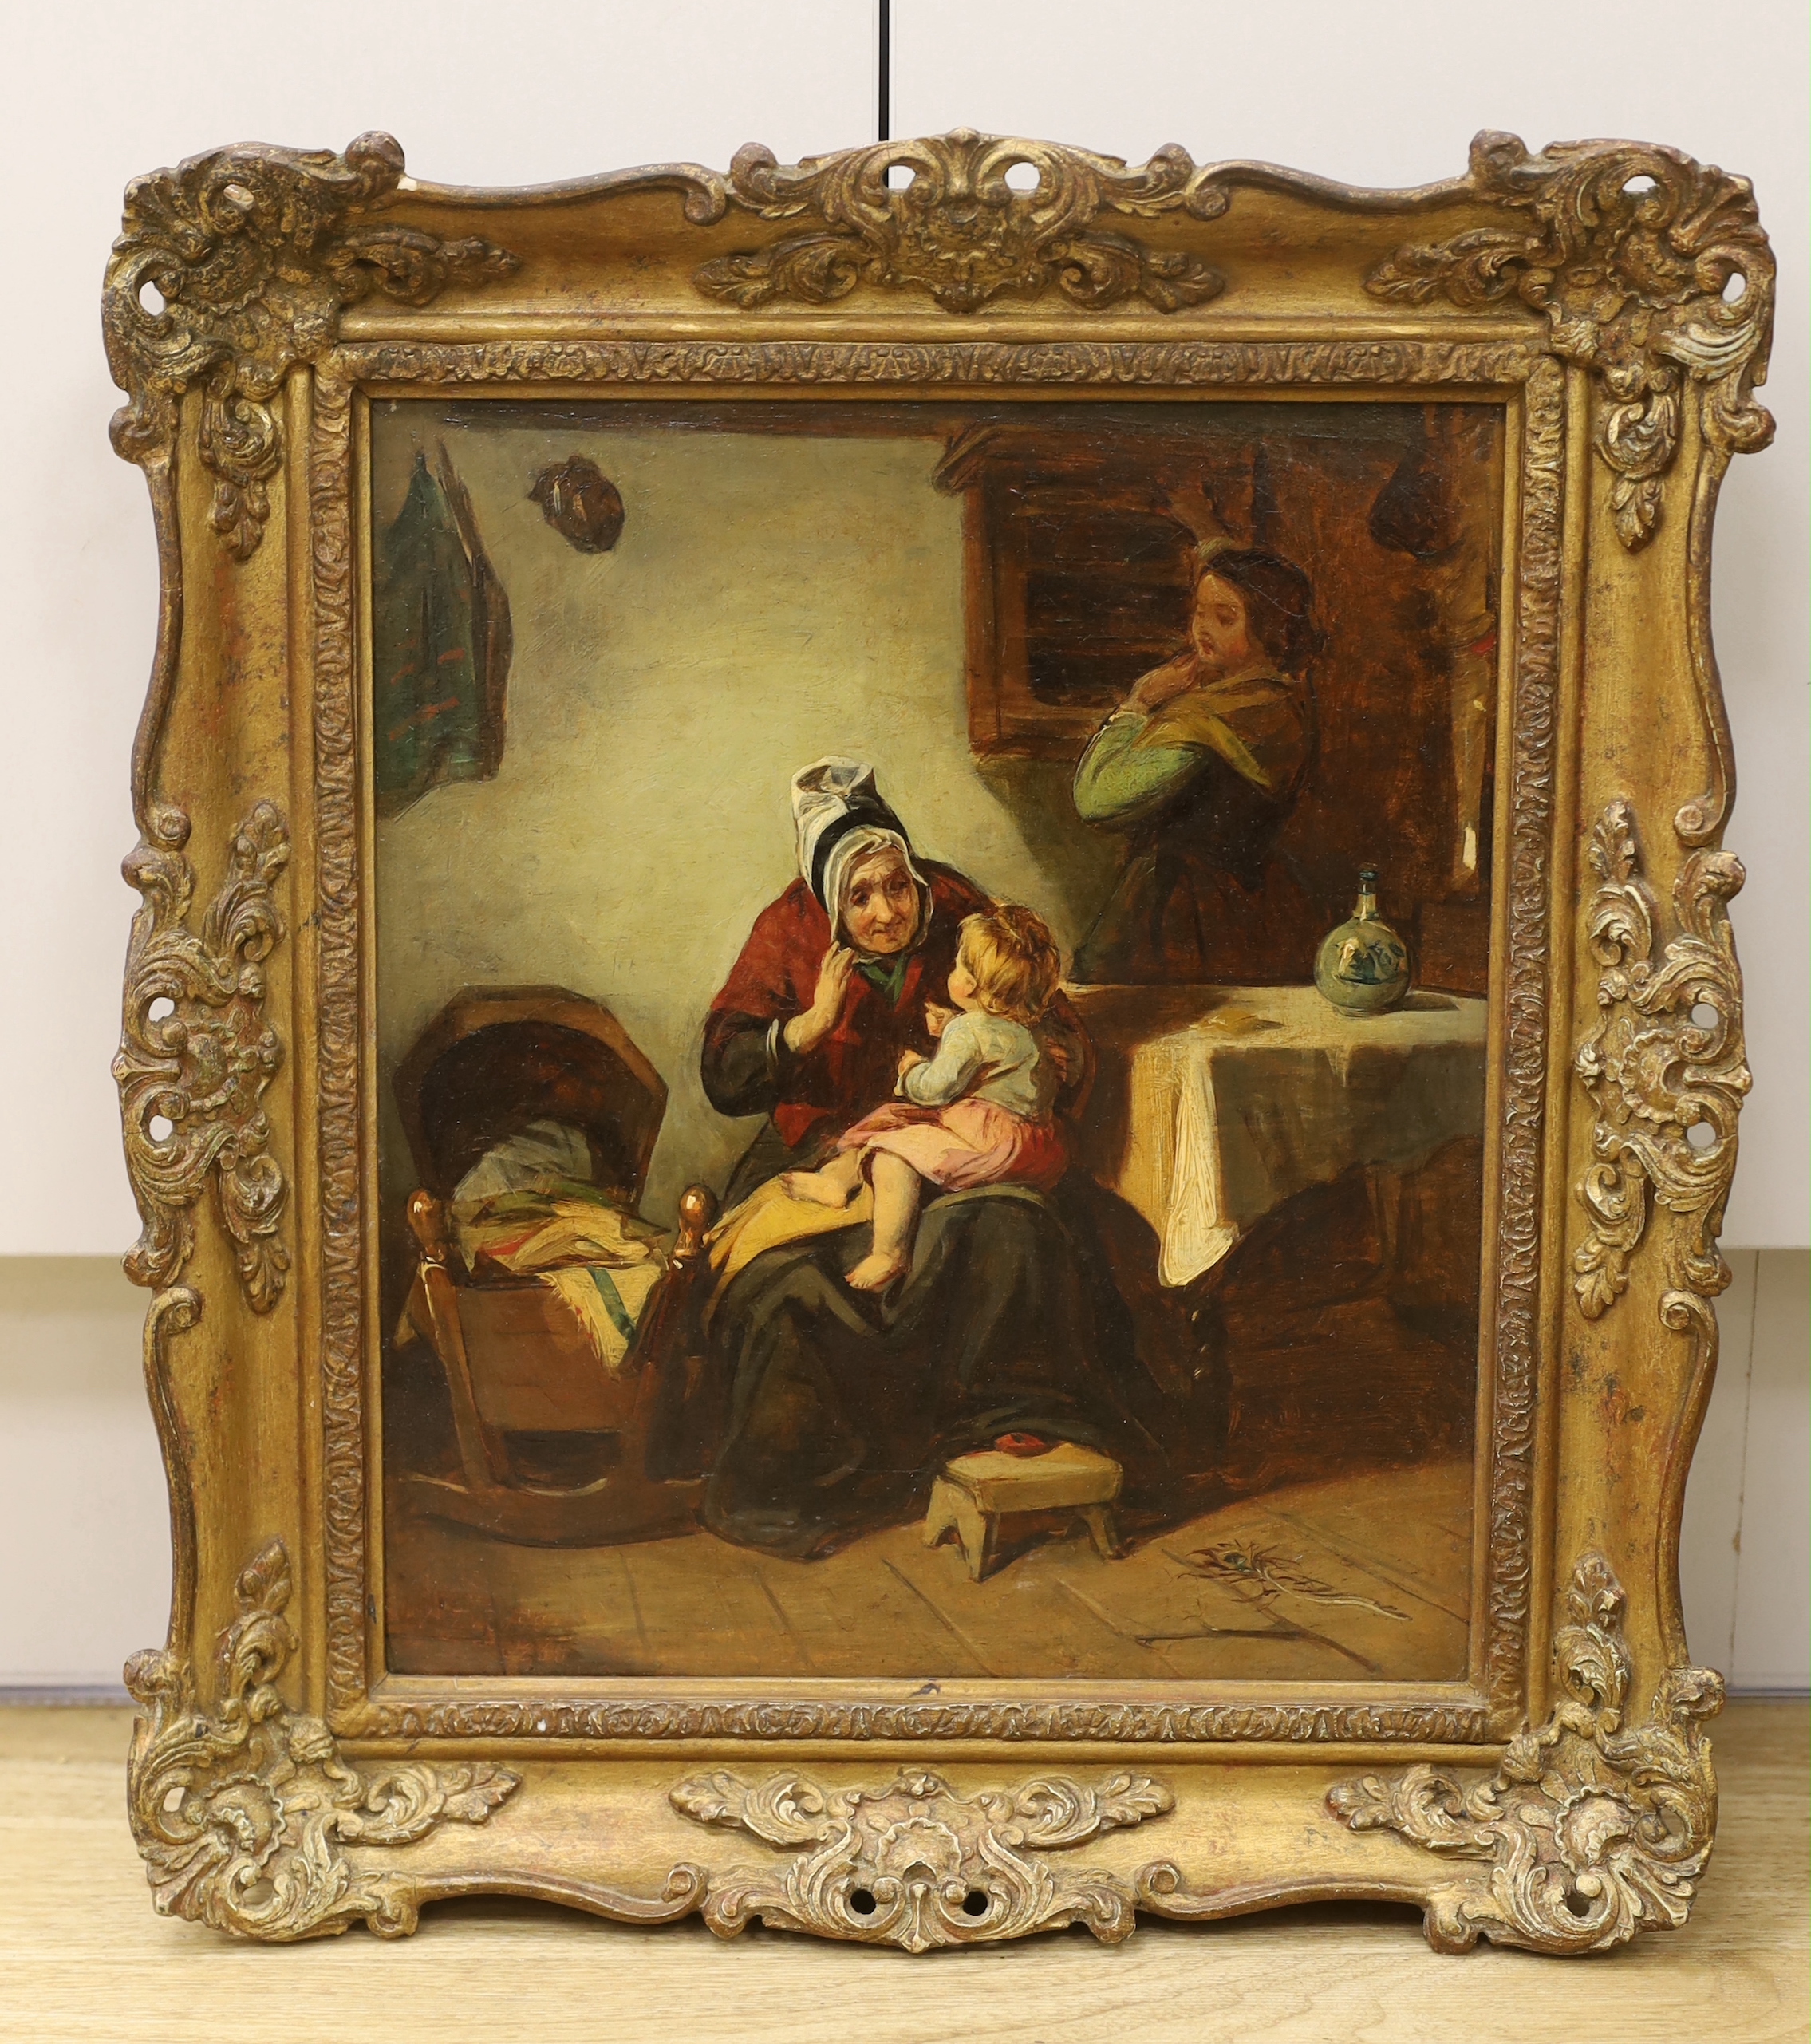 Robert Thorburn Ross (Scottish 1816 - 1876) oil on canvas, 'Granny knows best', signed and dated 1868, 32 x 27cm, ornate gilt frame